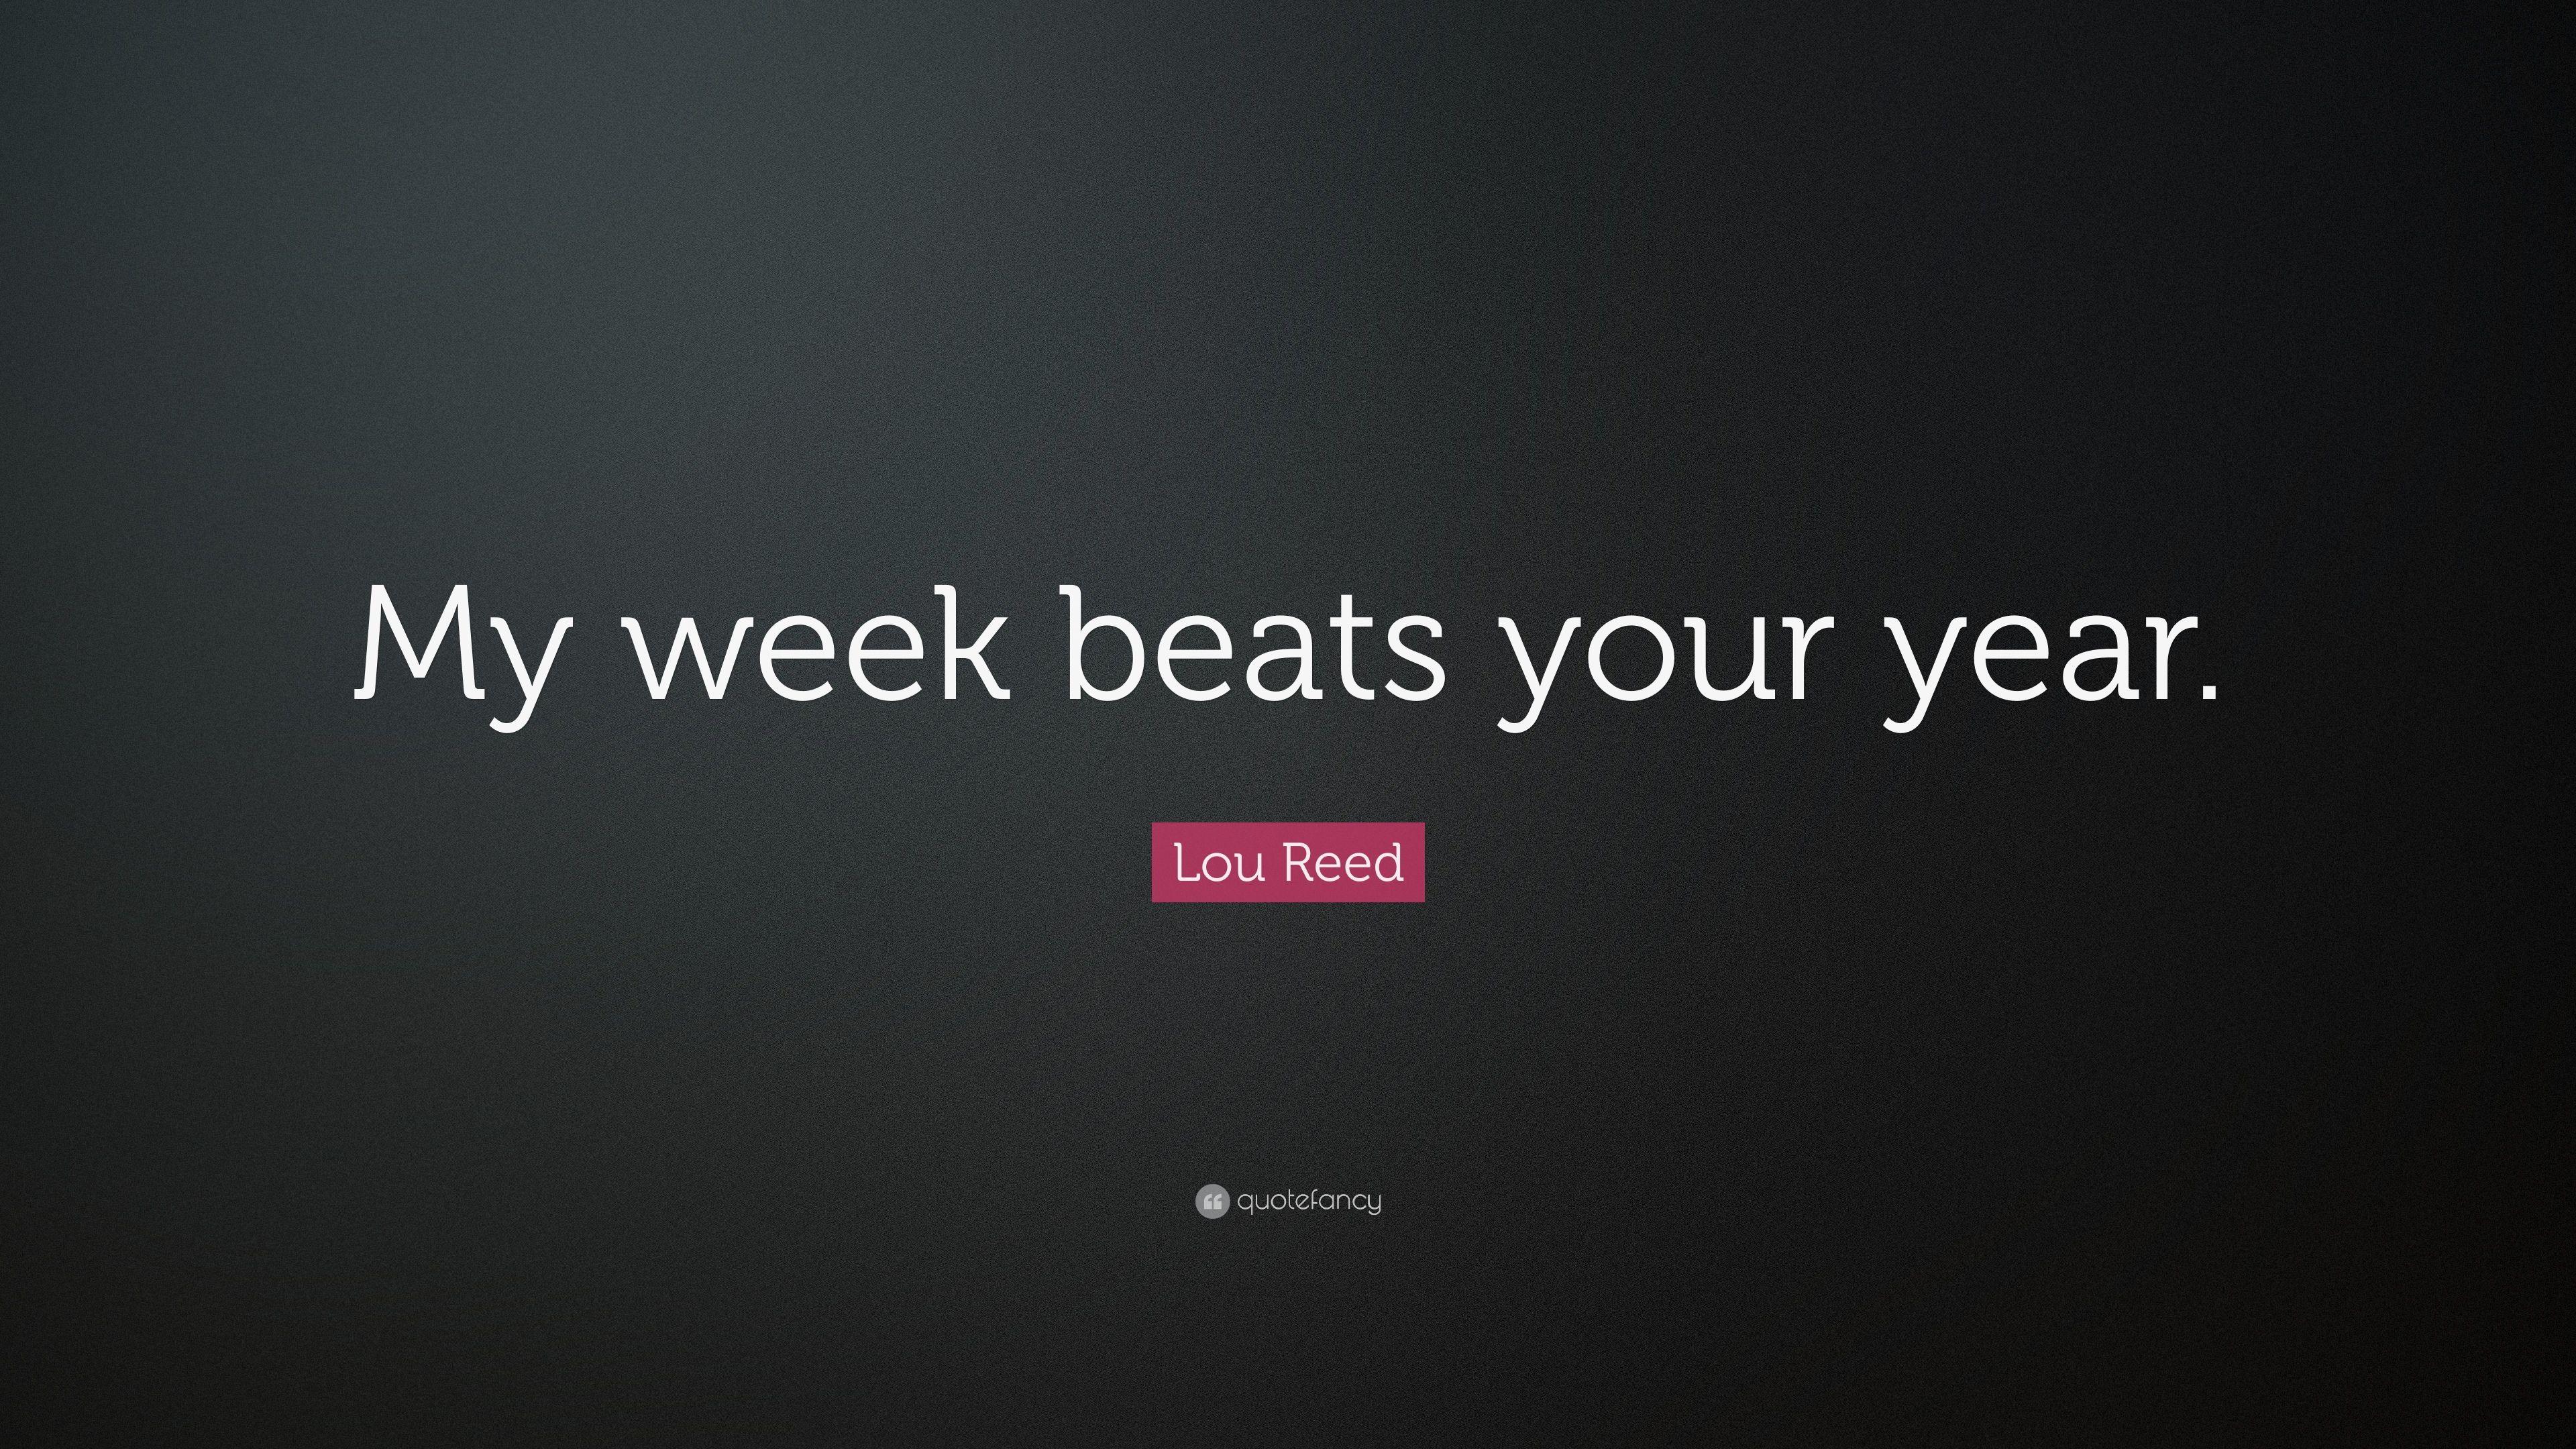 Lou Reed Quote: “My week beats your year.” 10 wallpaper